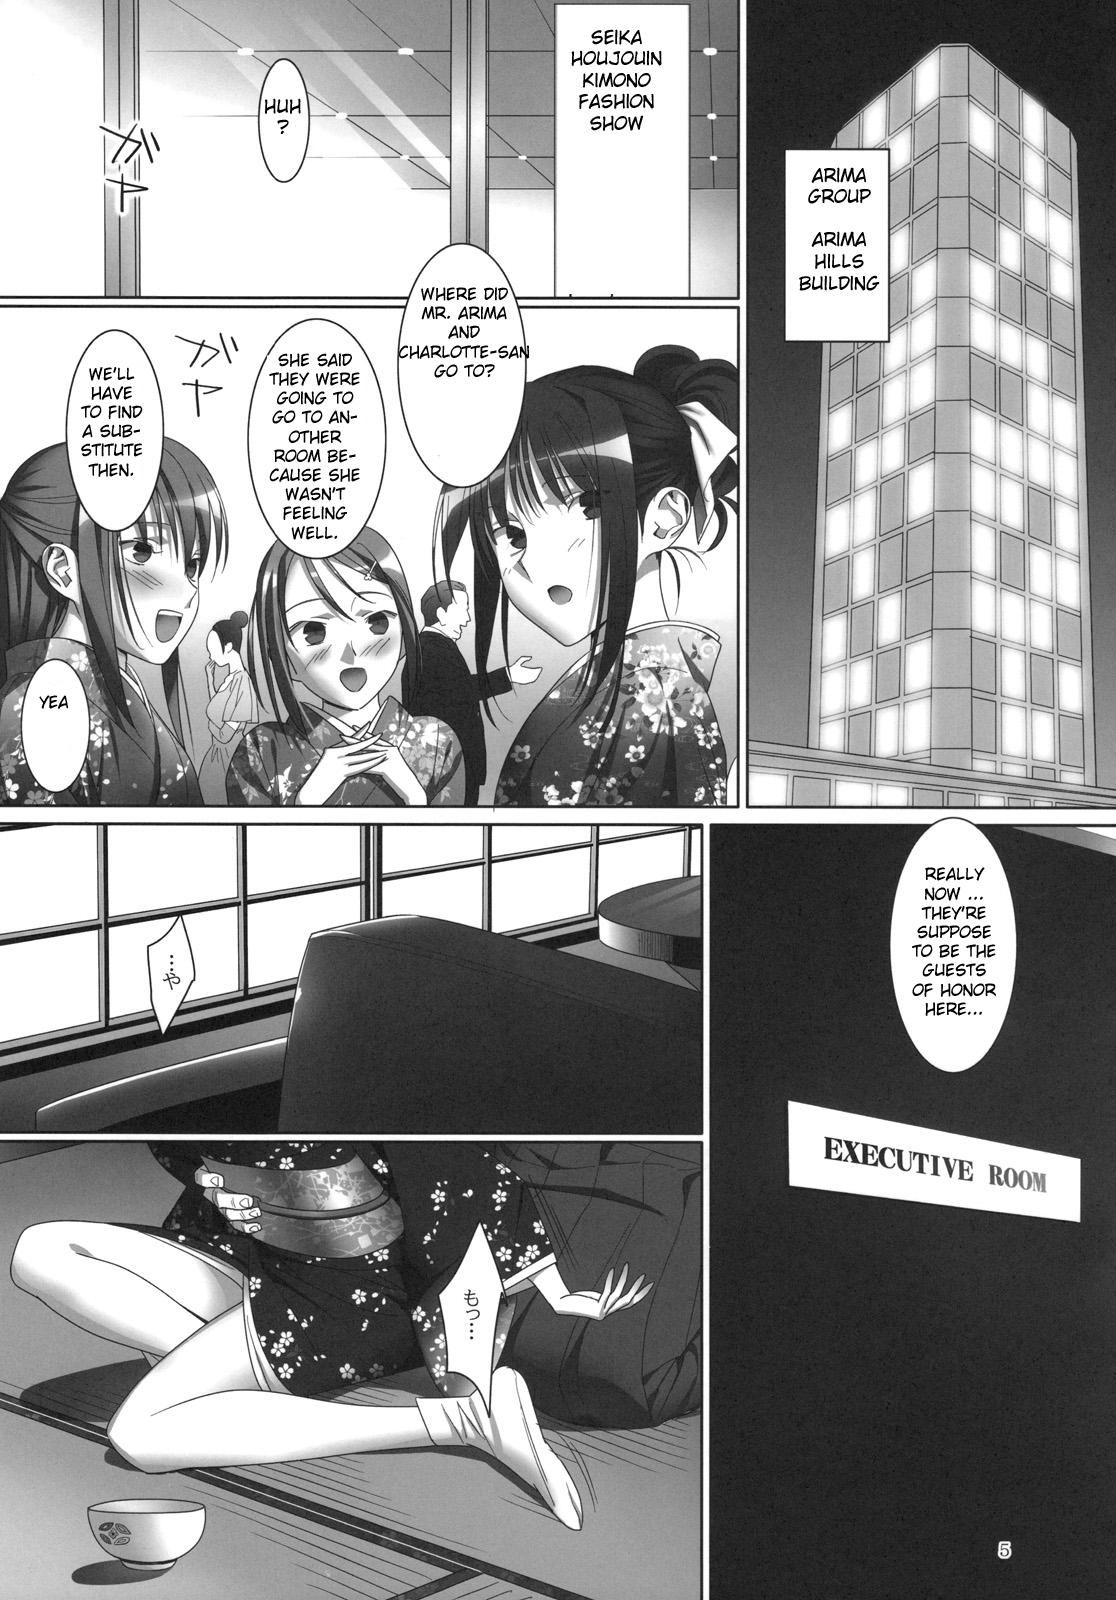 Lez Admired beautiful flower 3 - Princess lover Brother Sister - Page 5